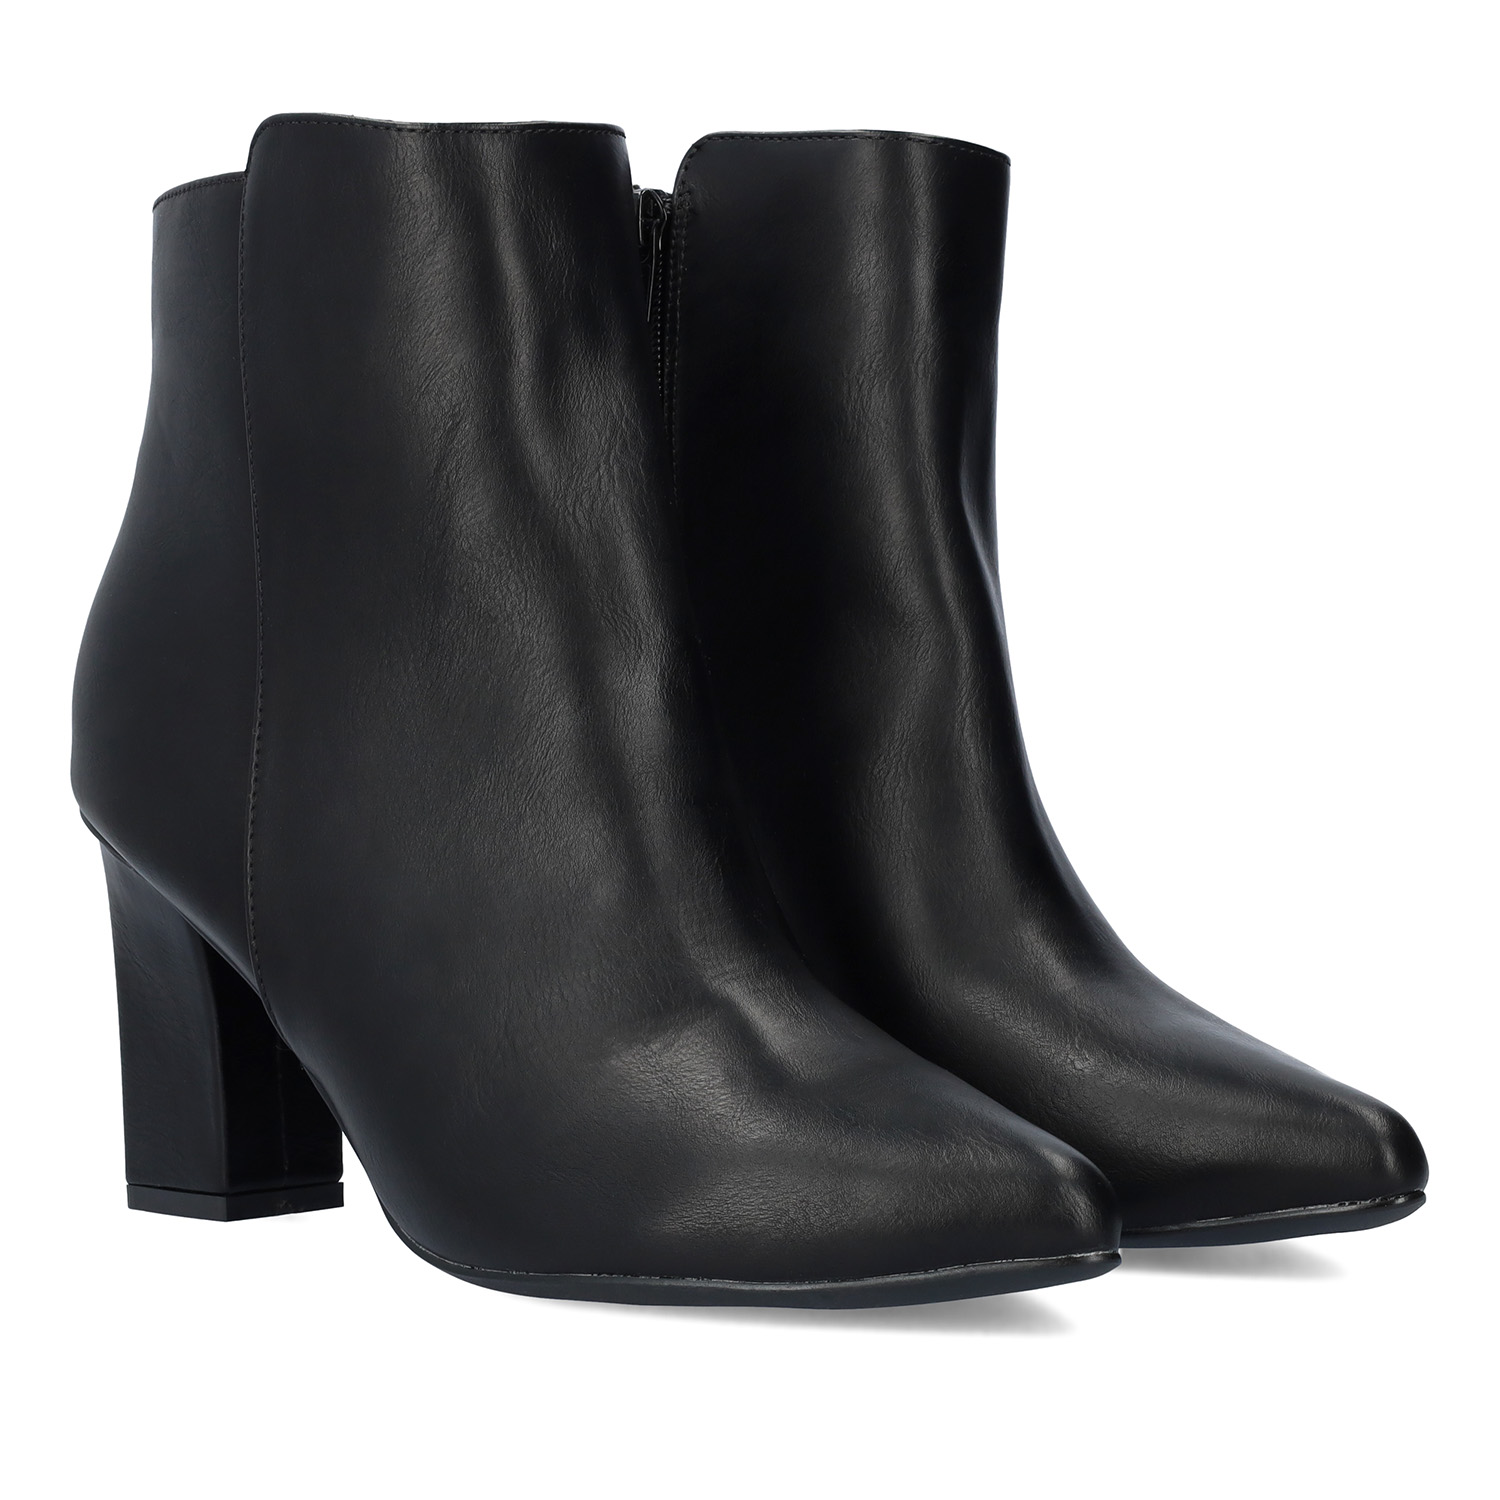 Heeled booties in black faux leather.